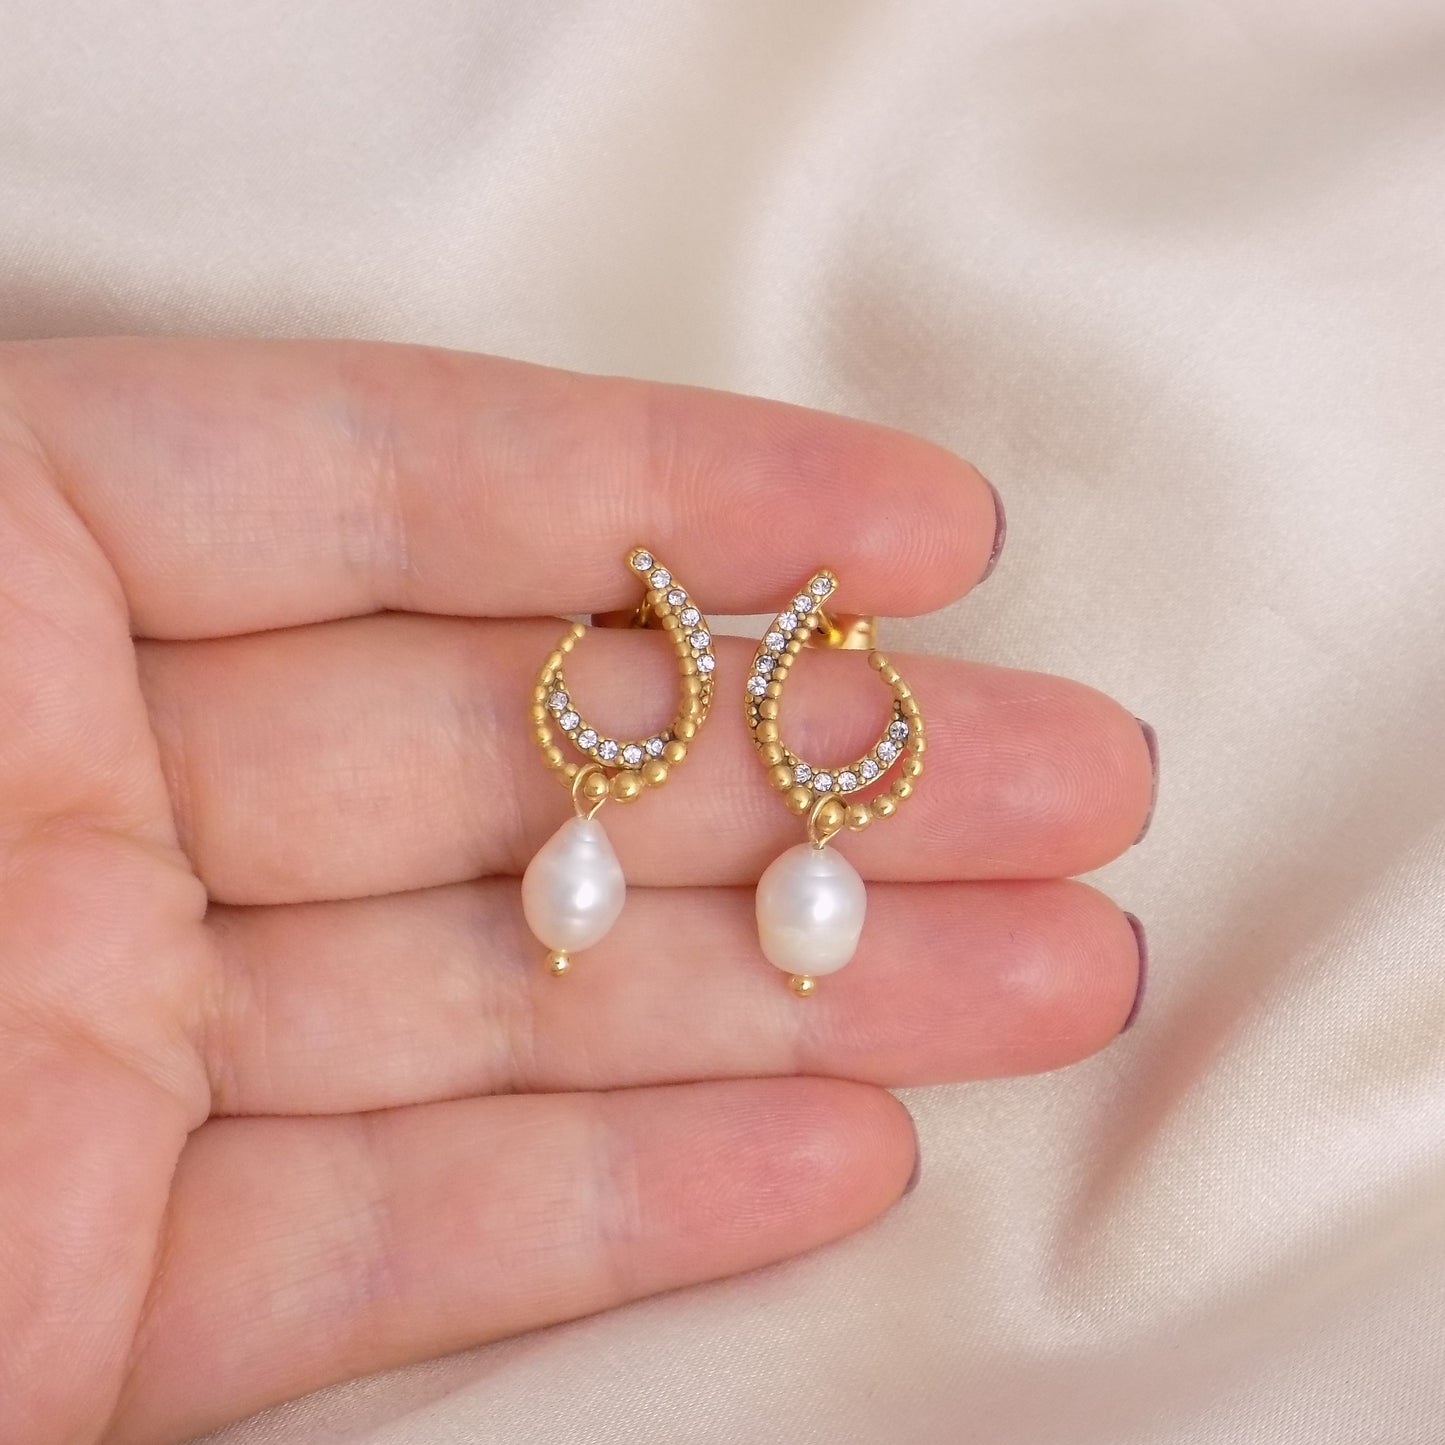 Unique Freshwater Pearl Stud Earrings with Tiny Cubic Zirconia Stones - Minimalist Trendy